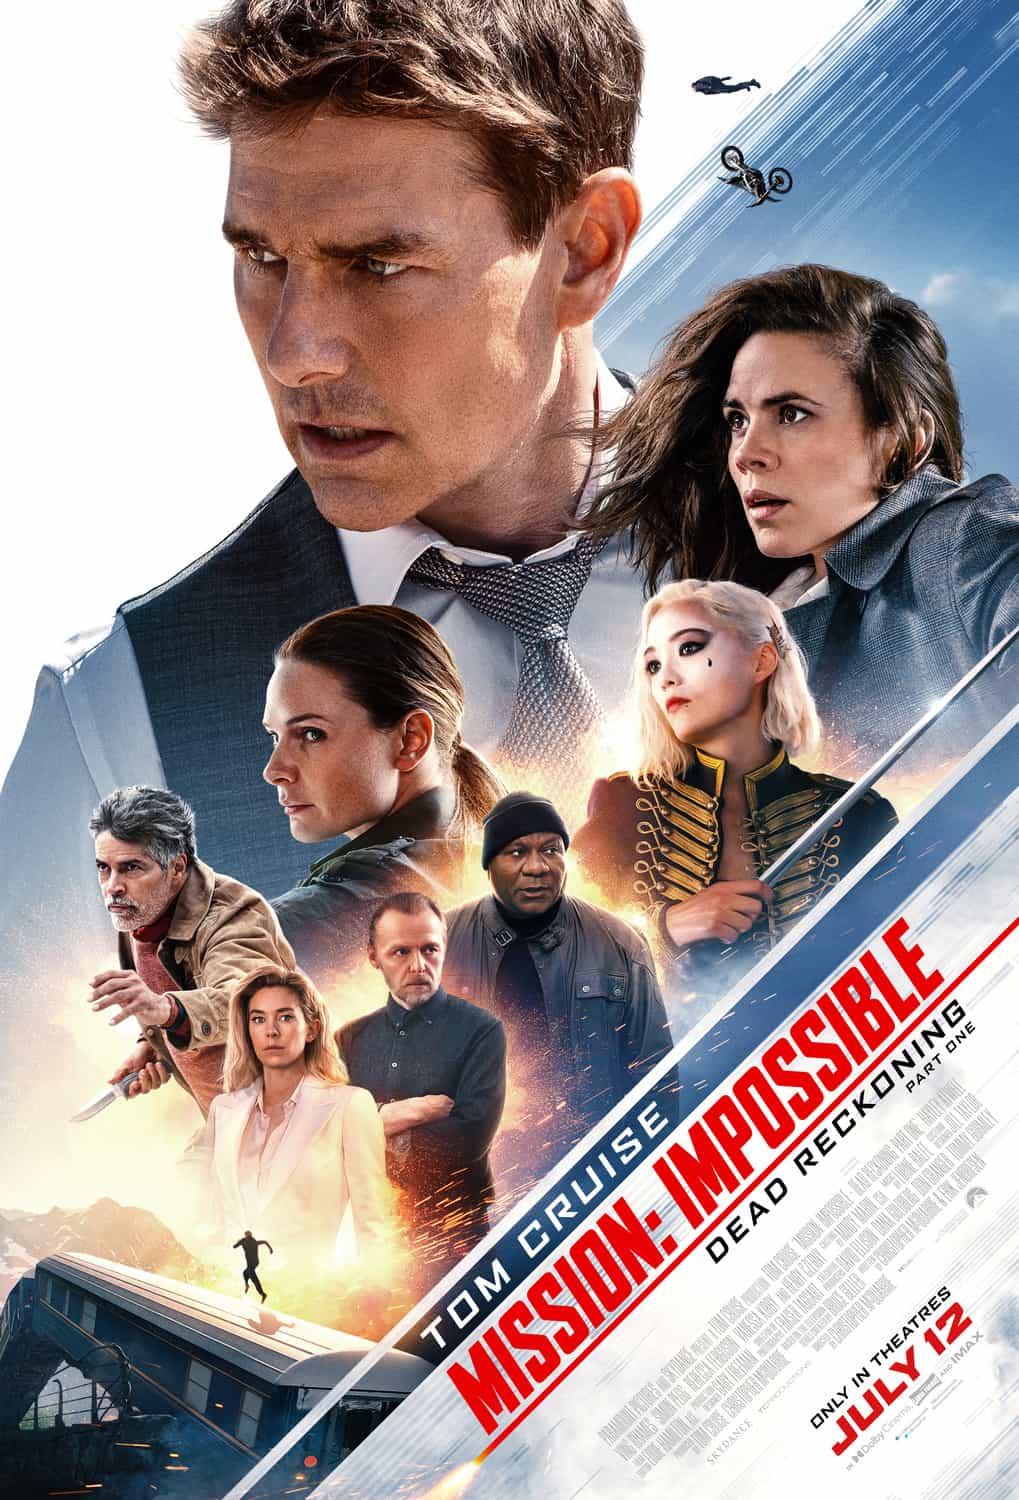 Check out the new trailer and poster for upcoming movie Mission:Impossible - Dead Reckoning Part 1 which stars Tom Cruise and Rebecca Ferguson - movie UK release date 14th July 2023 #missionimpossibledeadreckoningpart1